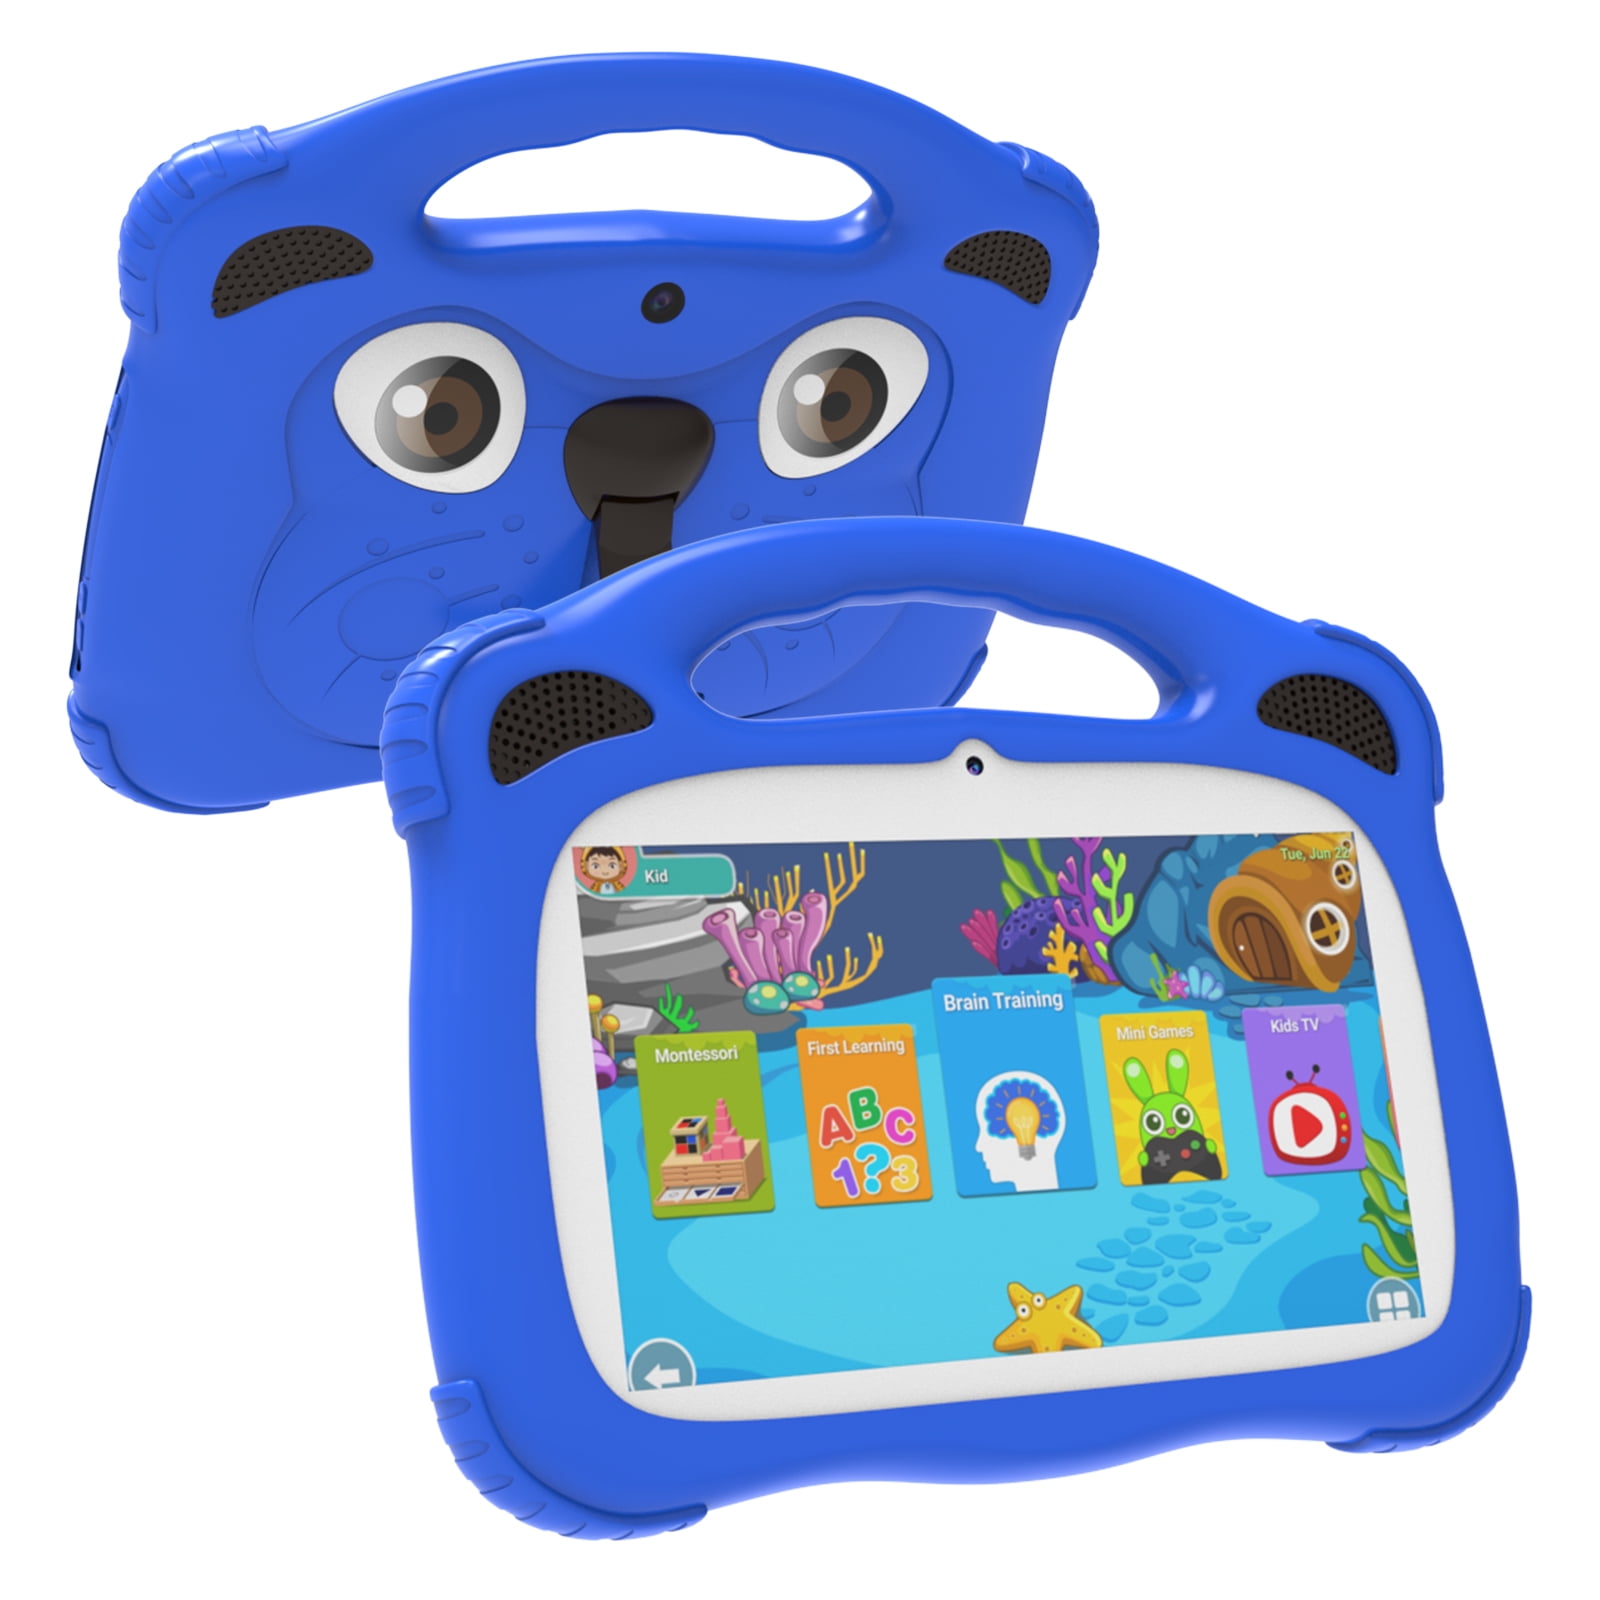 Kids Tablet 7 inch Tablet for Kids Android Toddler Tablet 2GB RAM 32GB ...